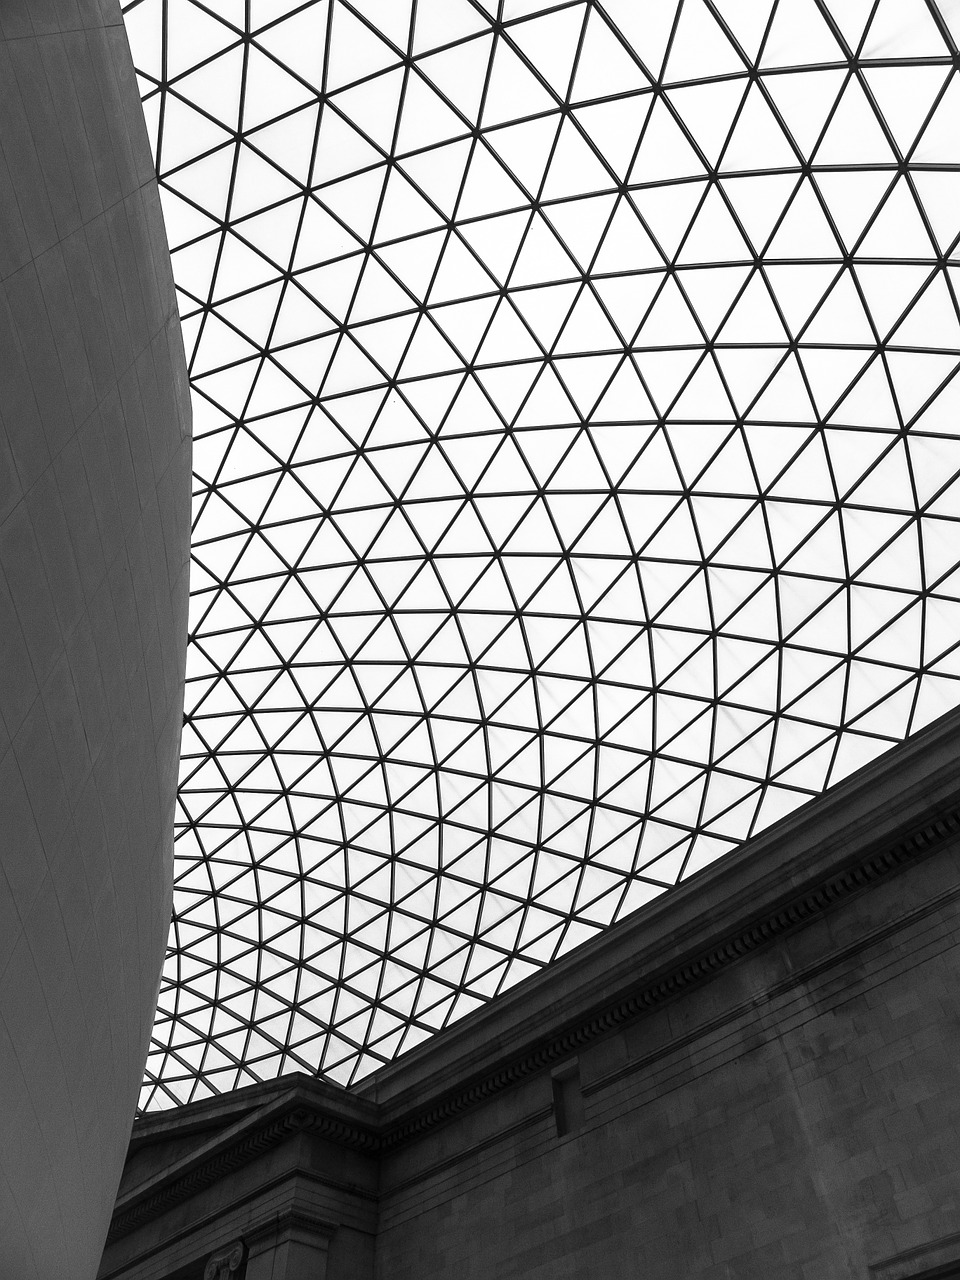 architecture museum ceiling free photo